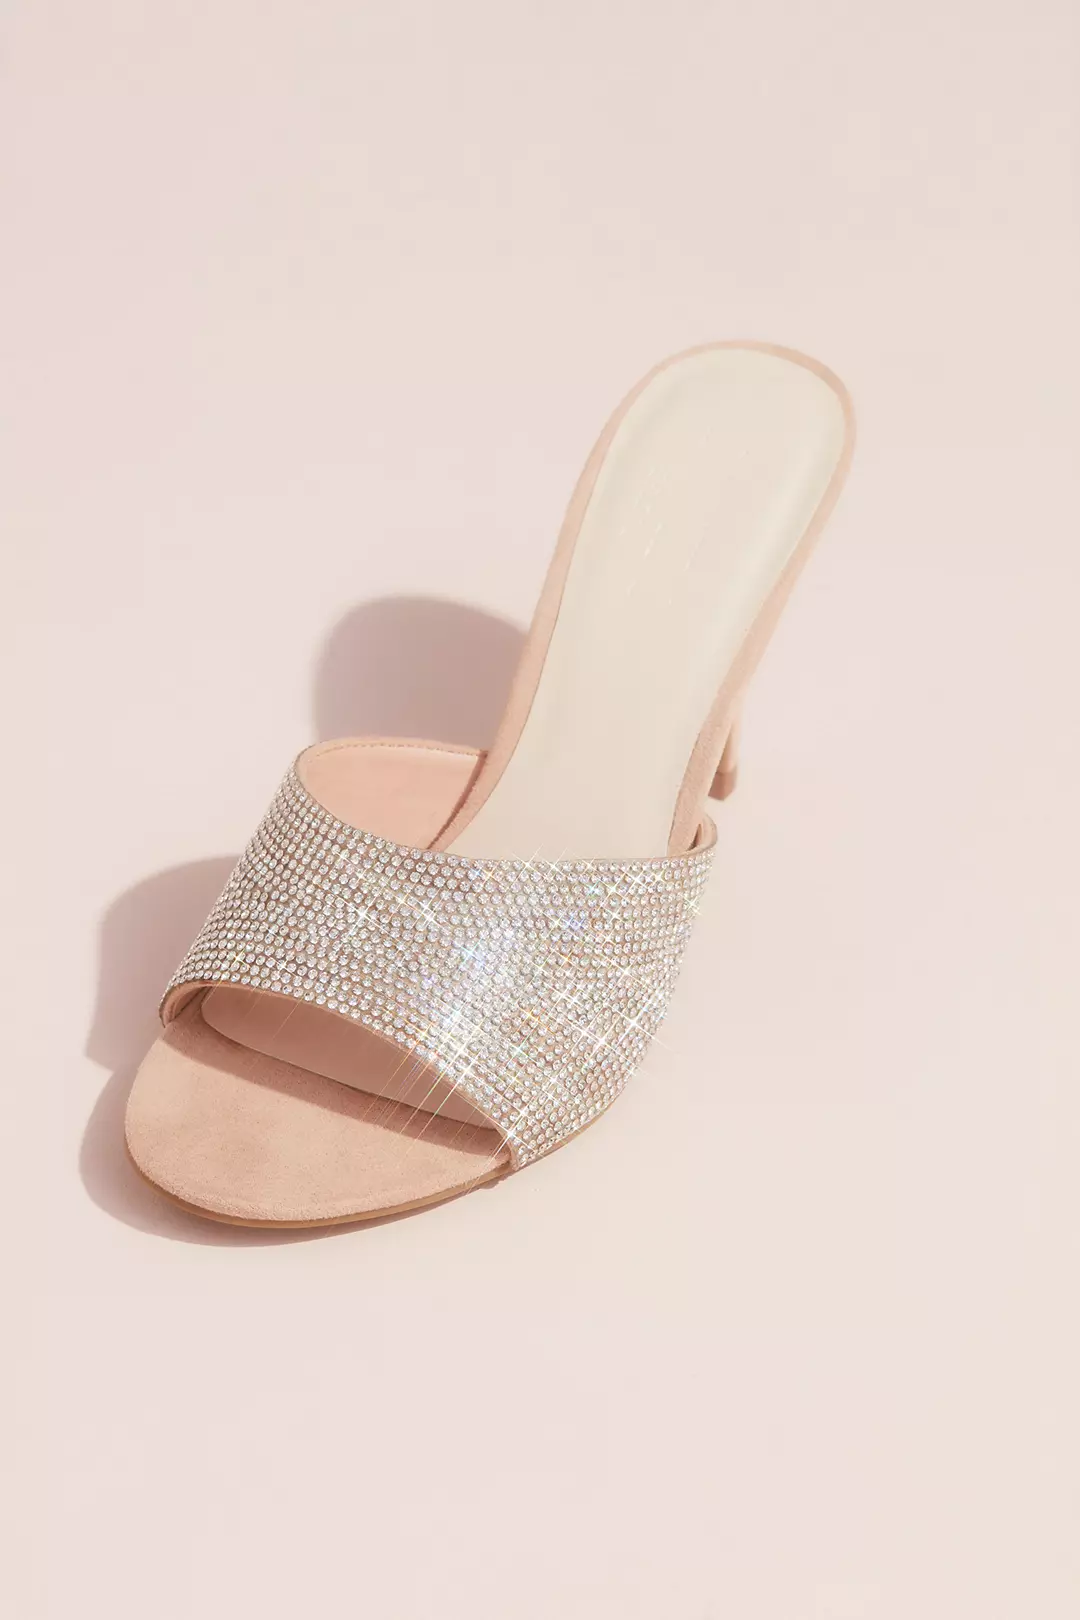 Open Toe Sueded High Heel Mules with Crystal Vamp Image